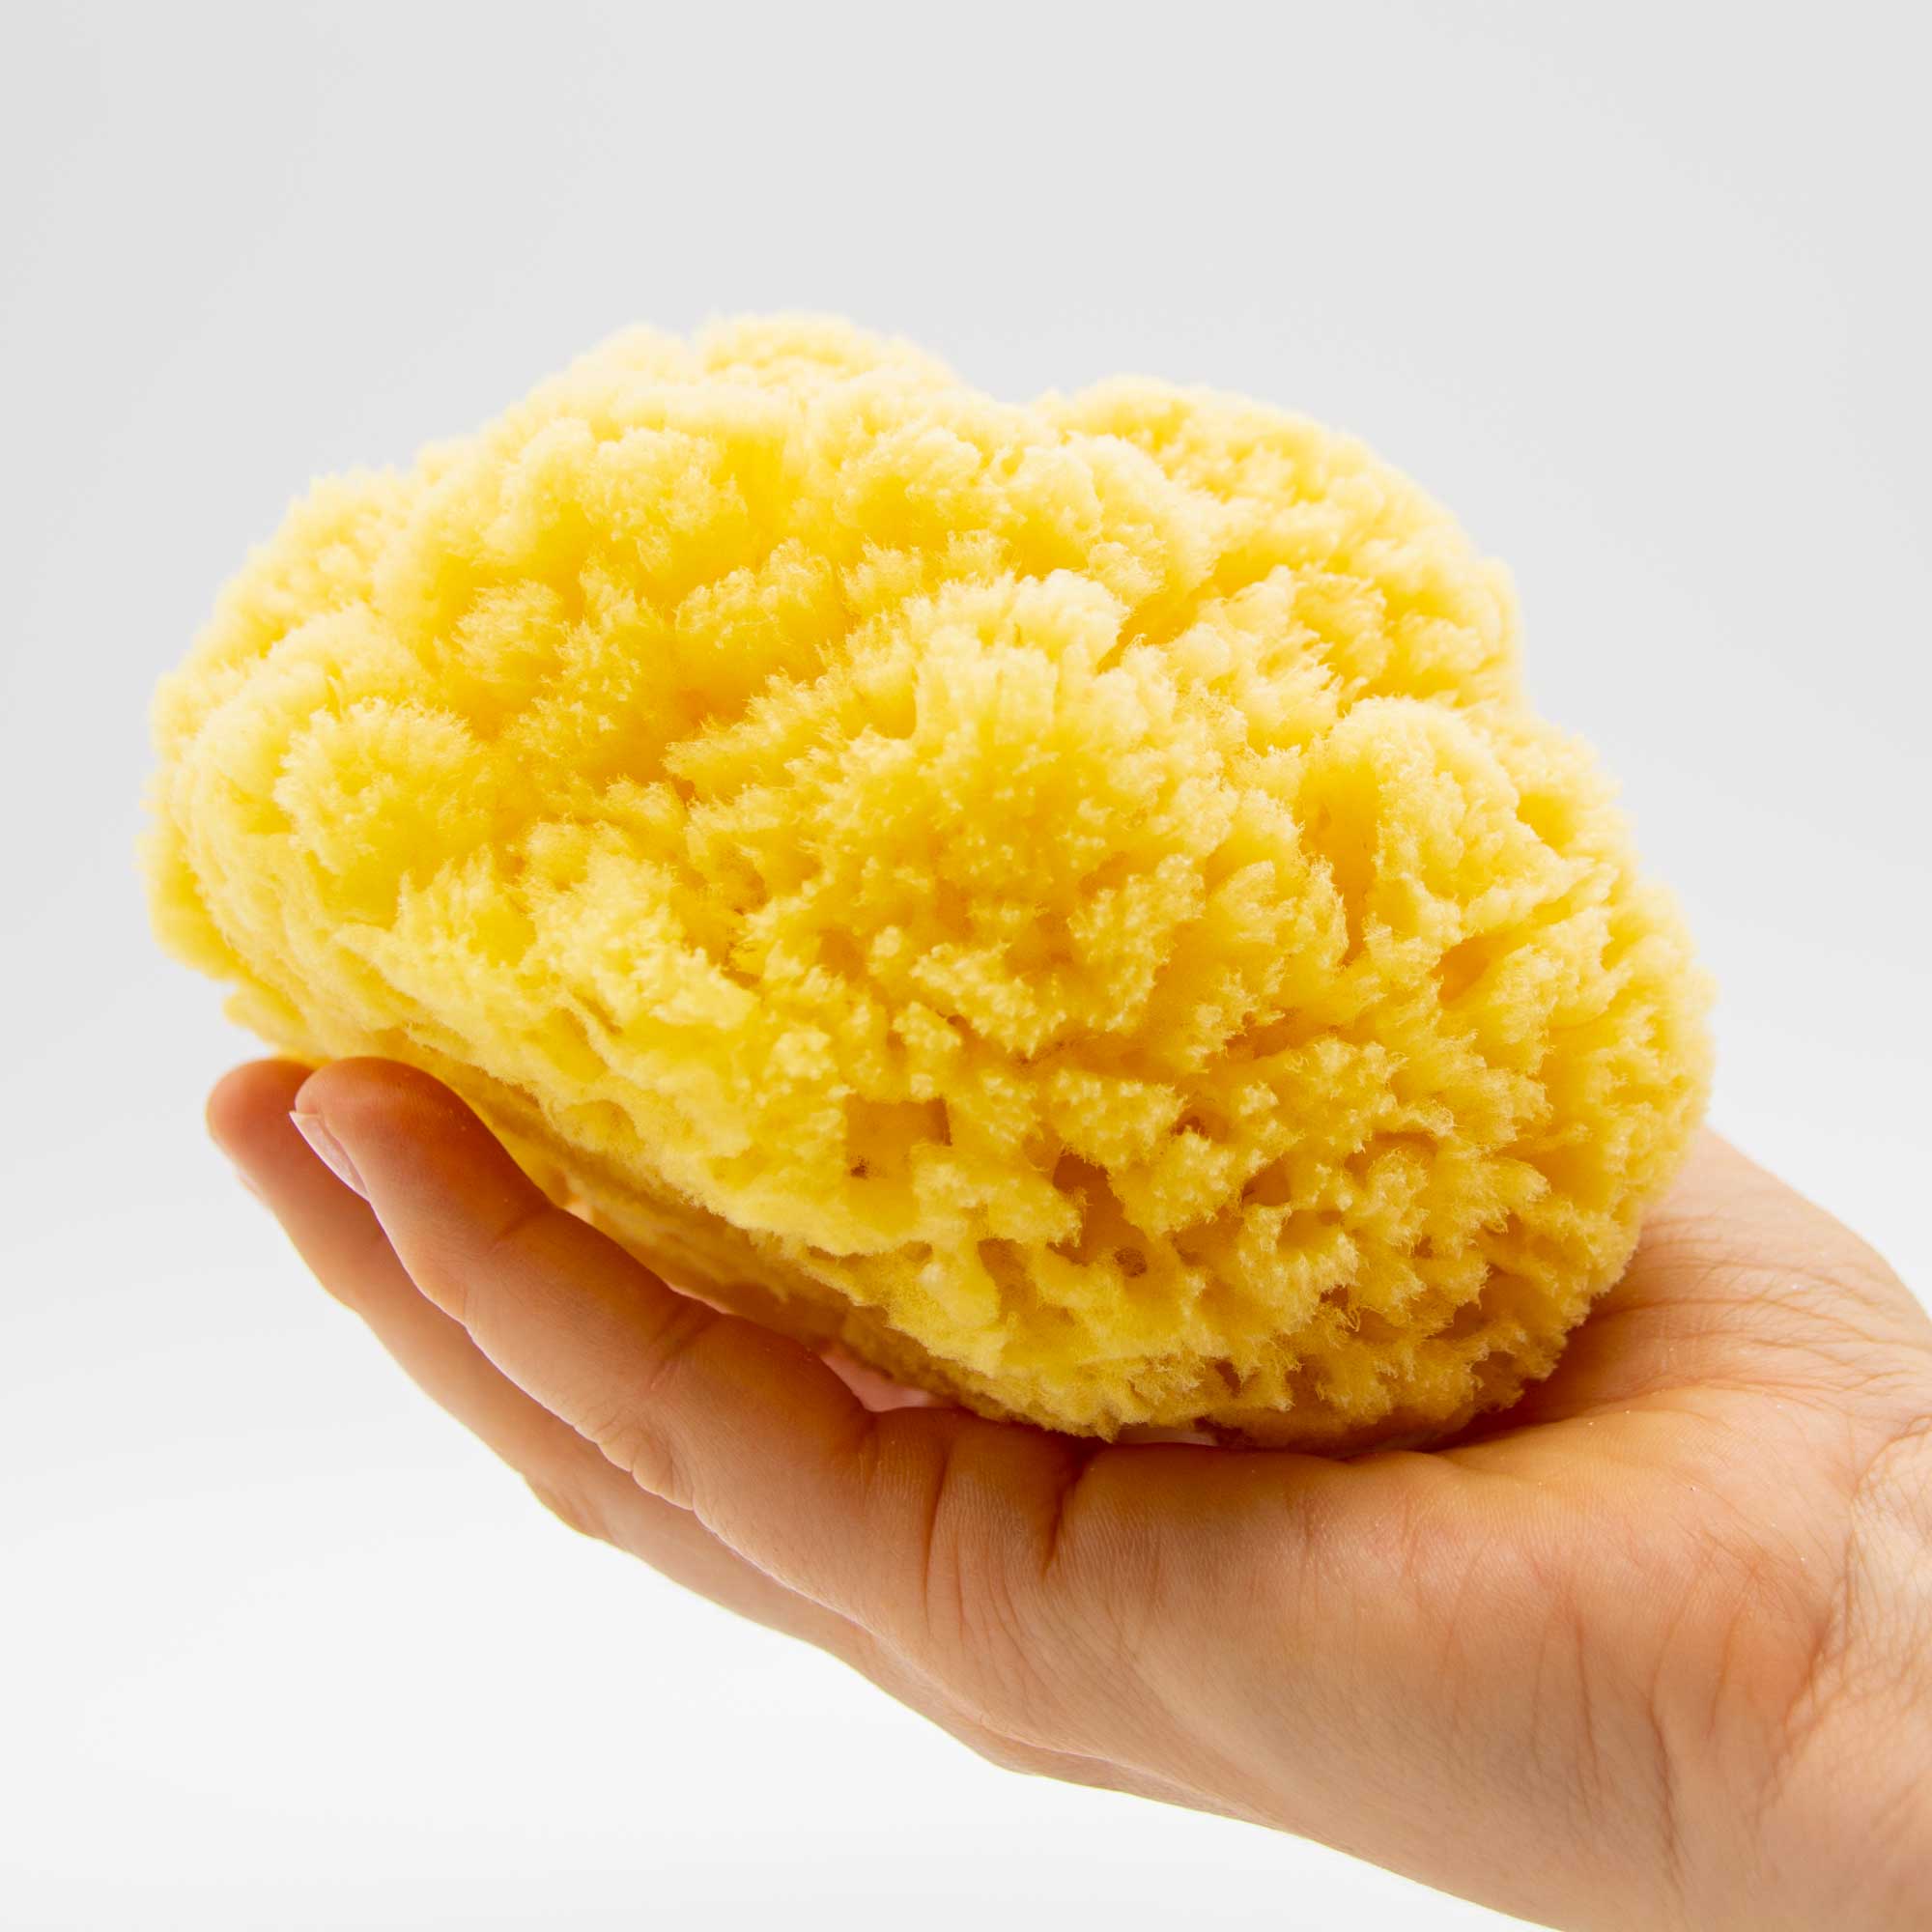 100% Natural Sea Sponge 5-6 by Spa DestinationsCreating The in Home Spa  Experience for The Perfect Bath or Shower Experience.